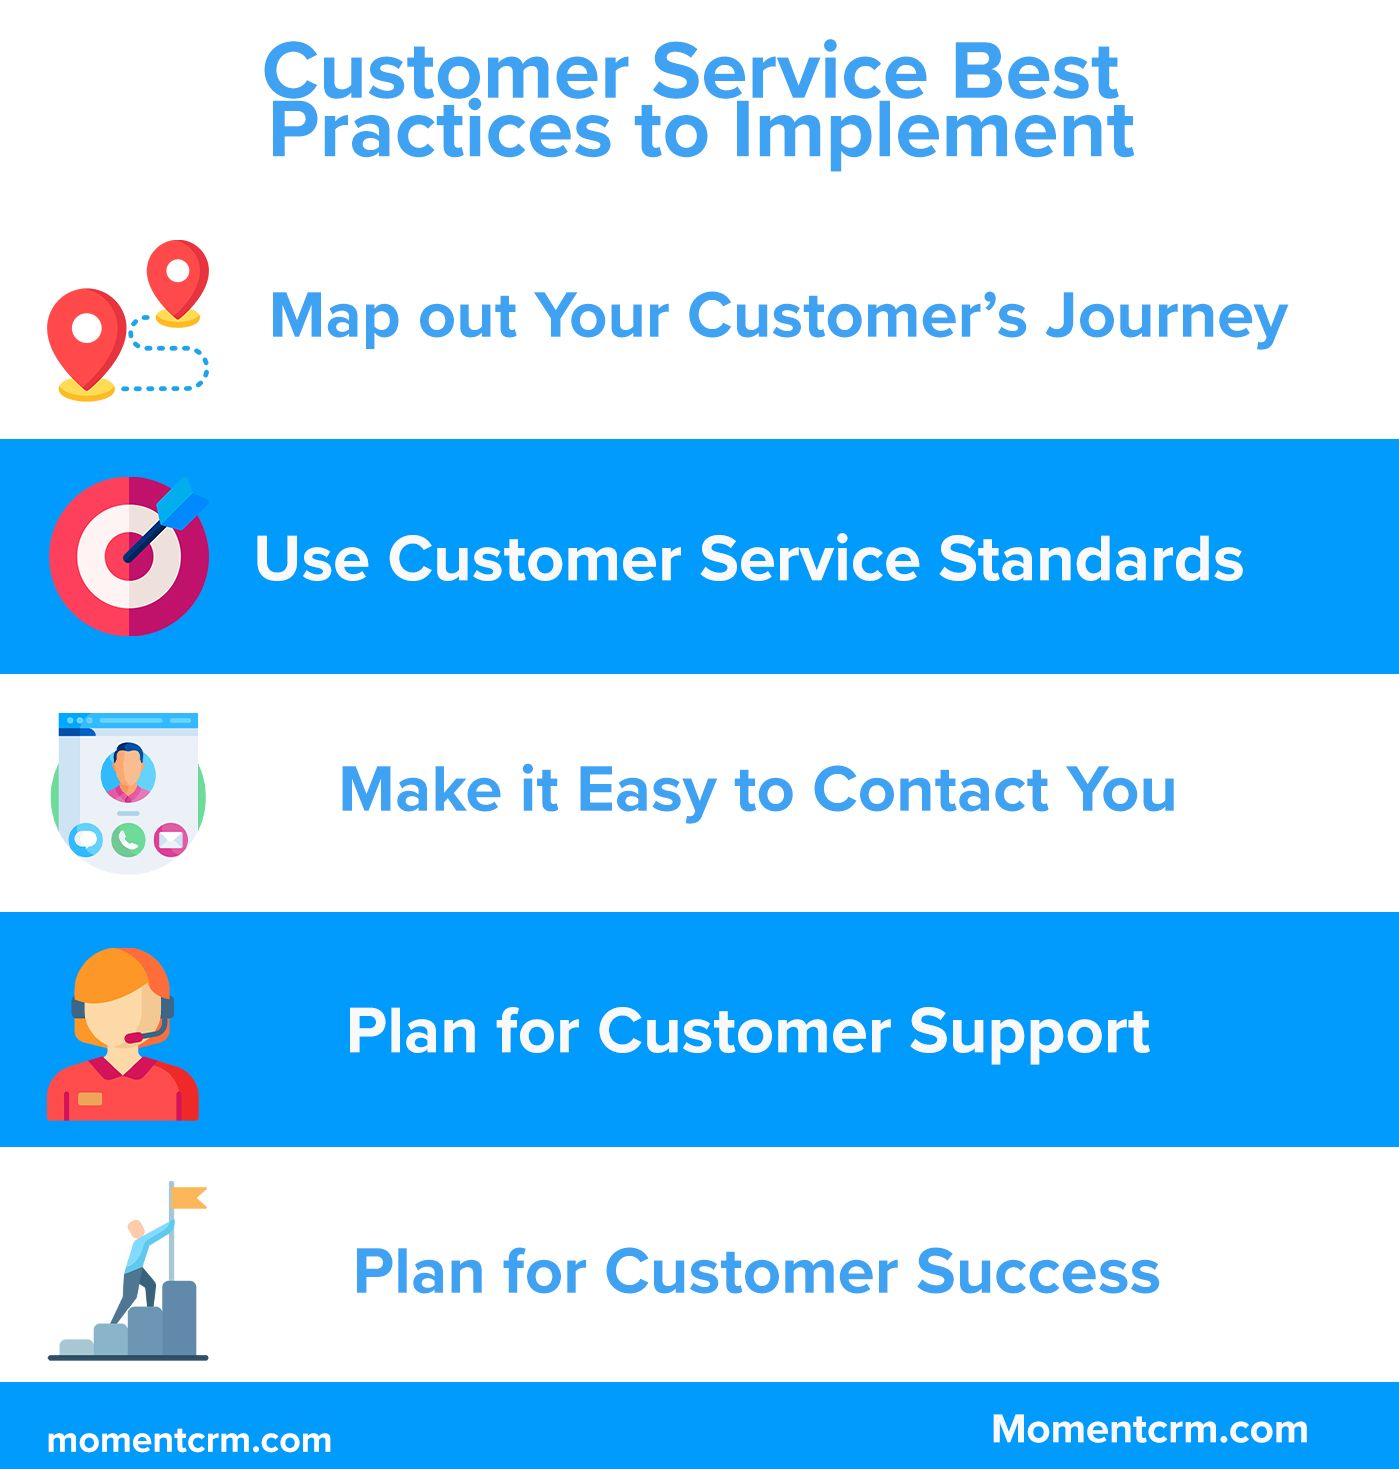 Customer Service Best Practices to implement